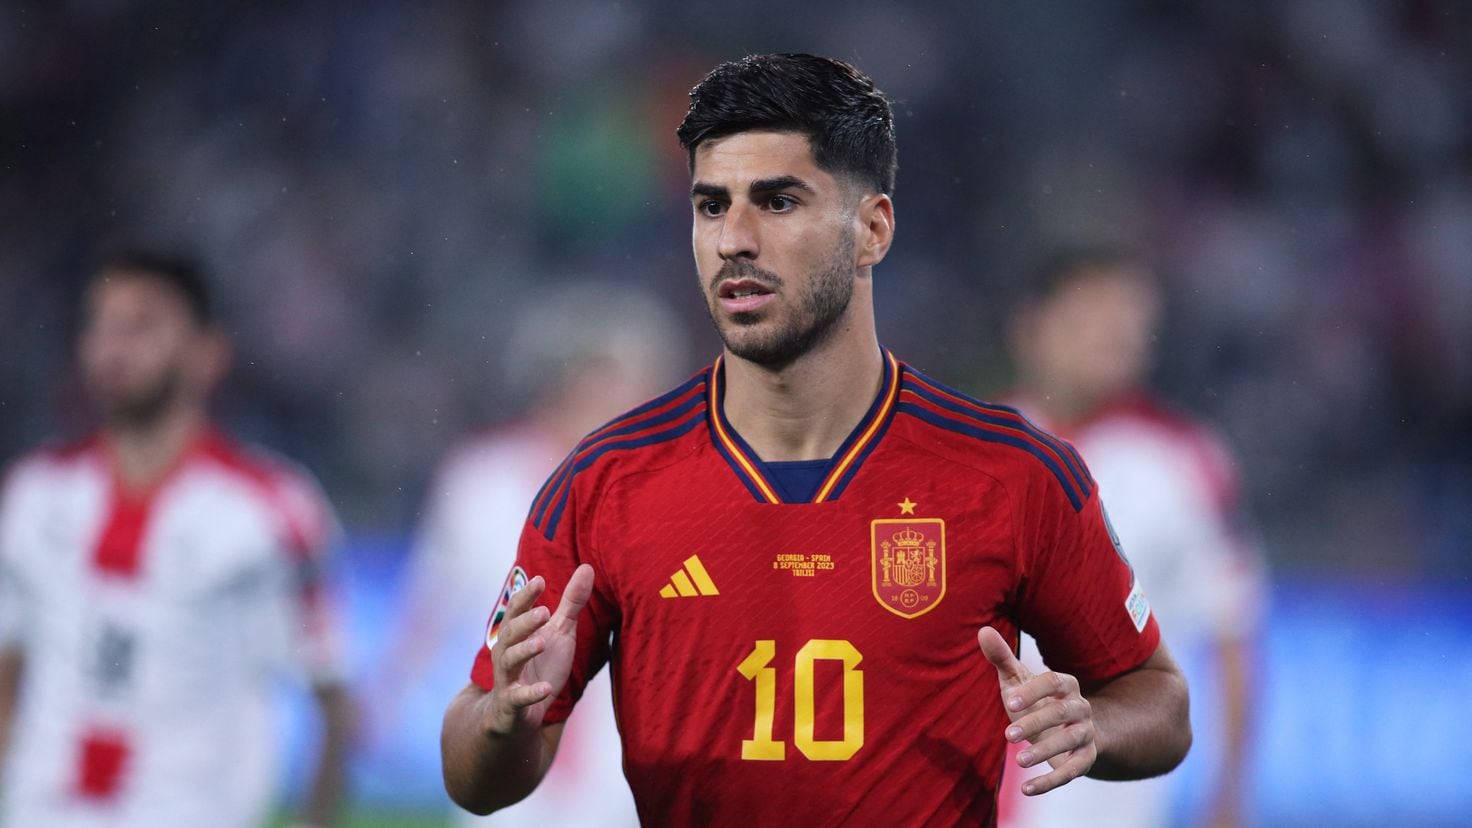 PSG confused with Asensio